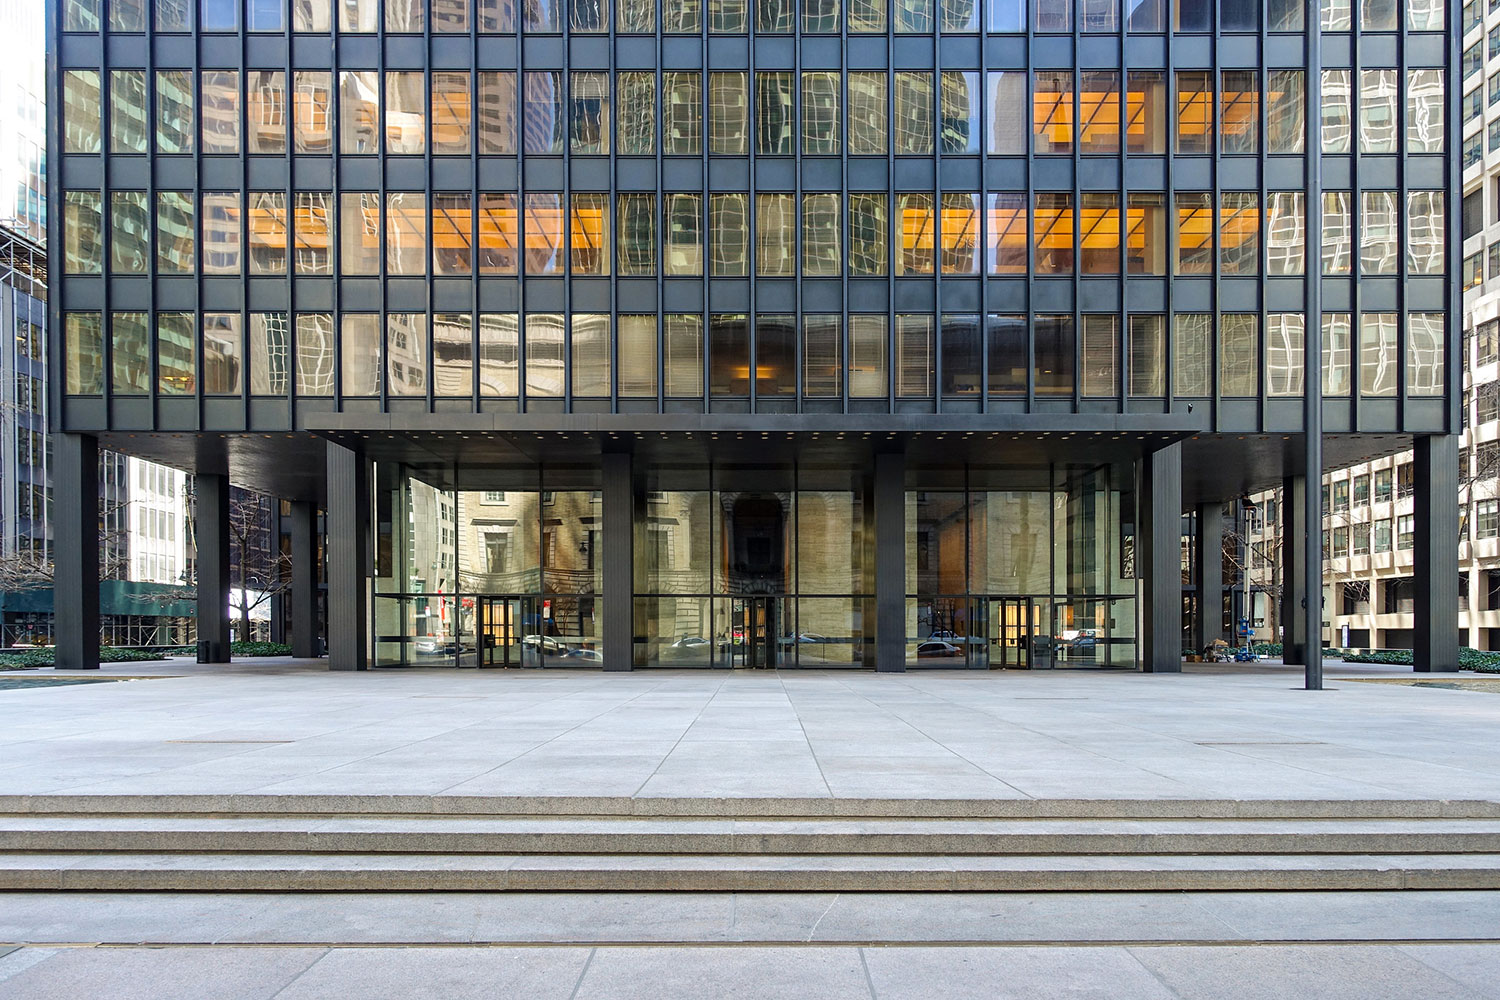 Exterior facade of the Seagram Building at the ground floor entry level.